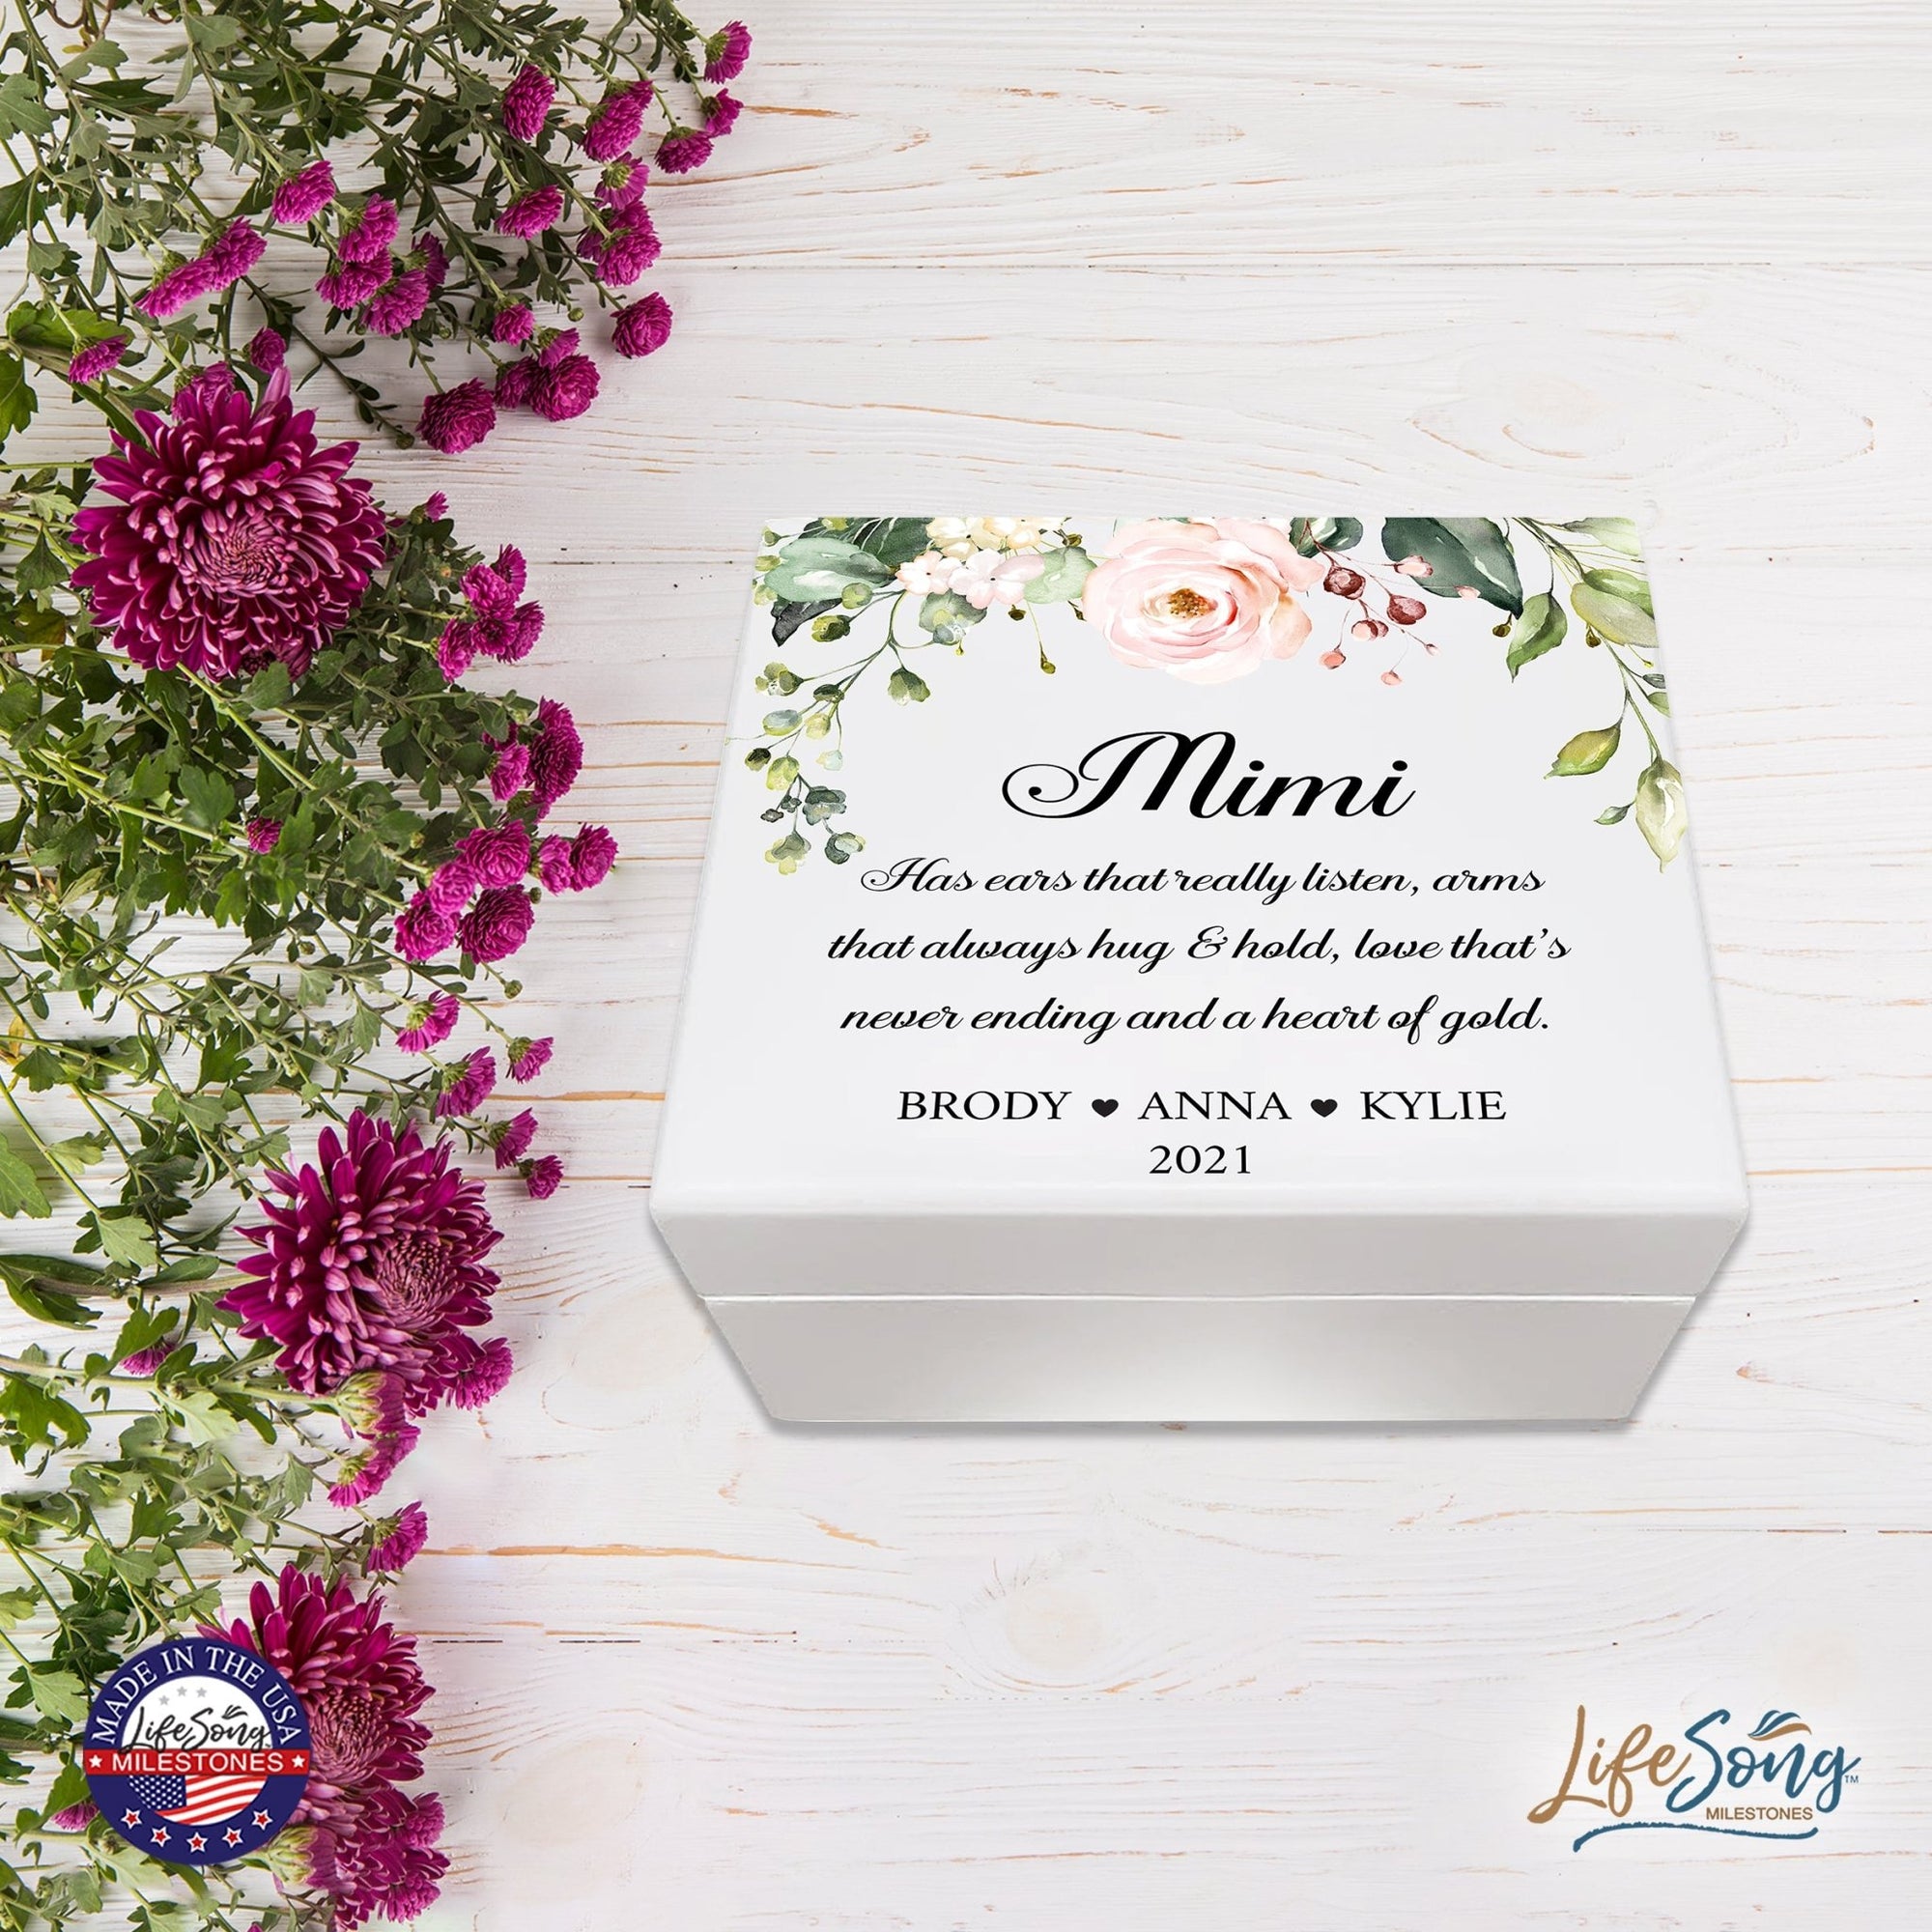 Personalized Mimi’s White Keepsake Box 6x5.5in with Inspirational verse - A Heart Of Gold - LifeSong Milestones